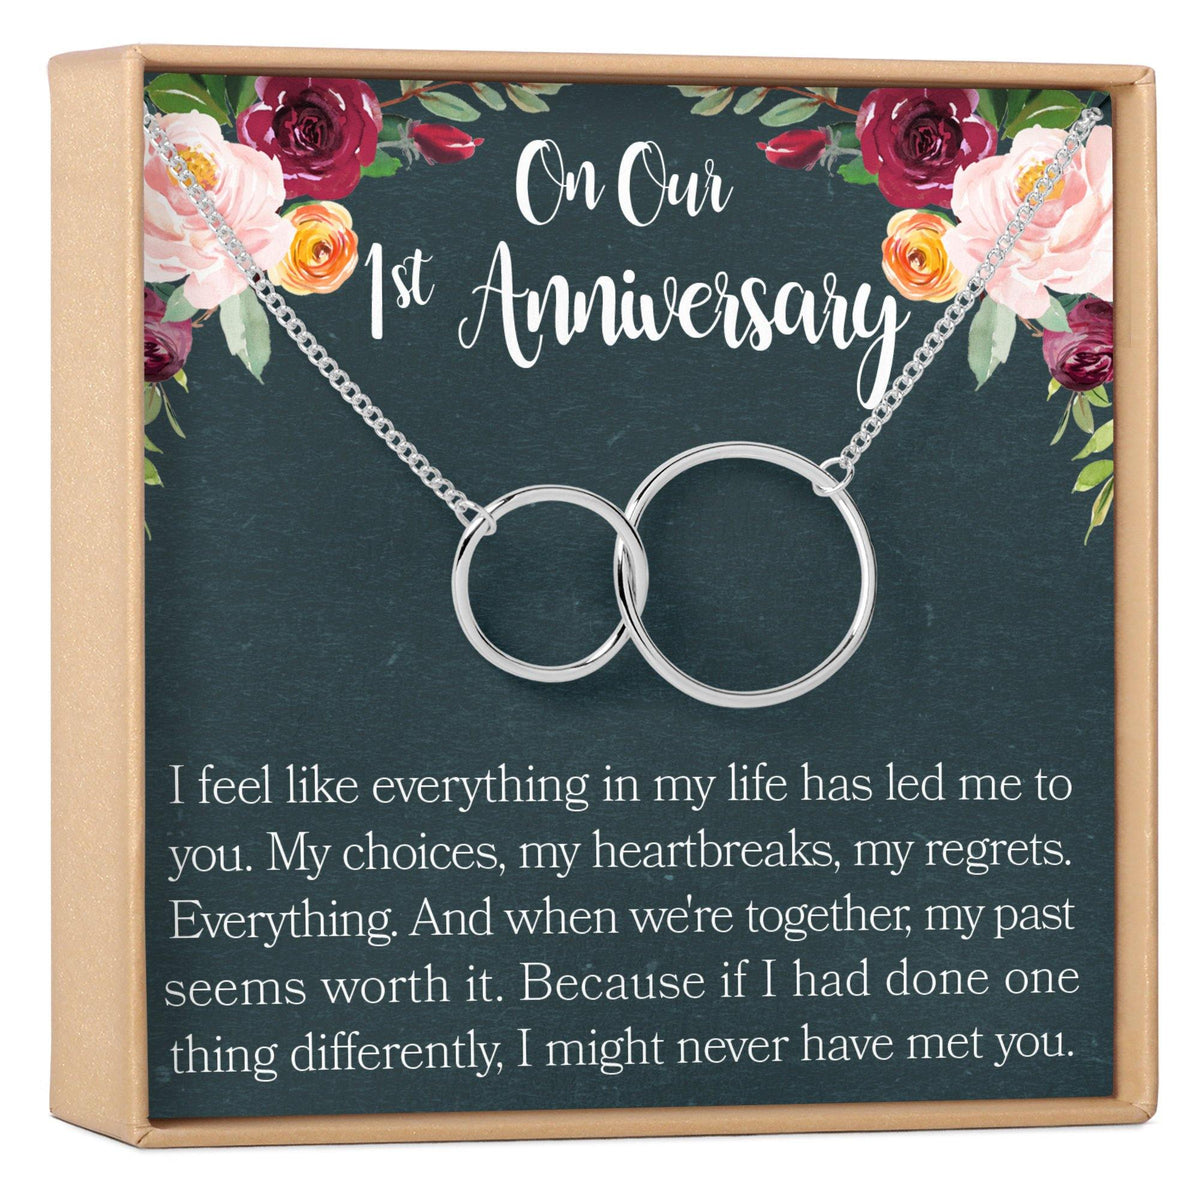 1st Anniversary Necklace - Dear Ava, Jewelry / Necklaces / Pendants